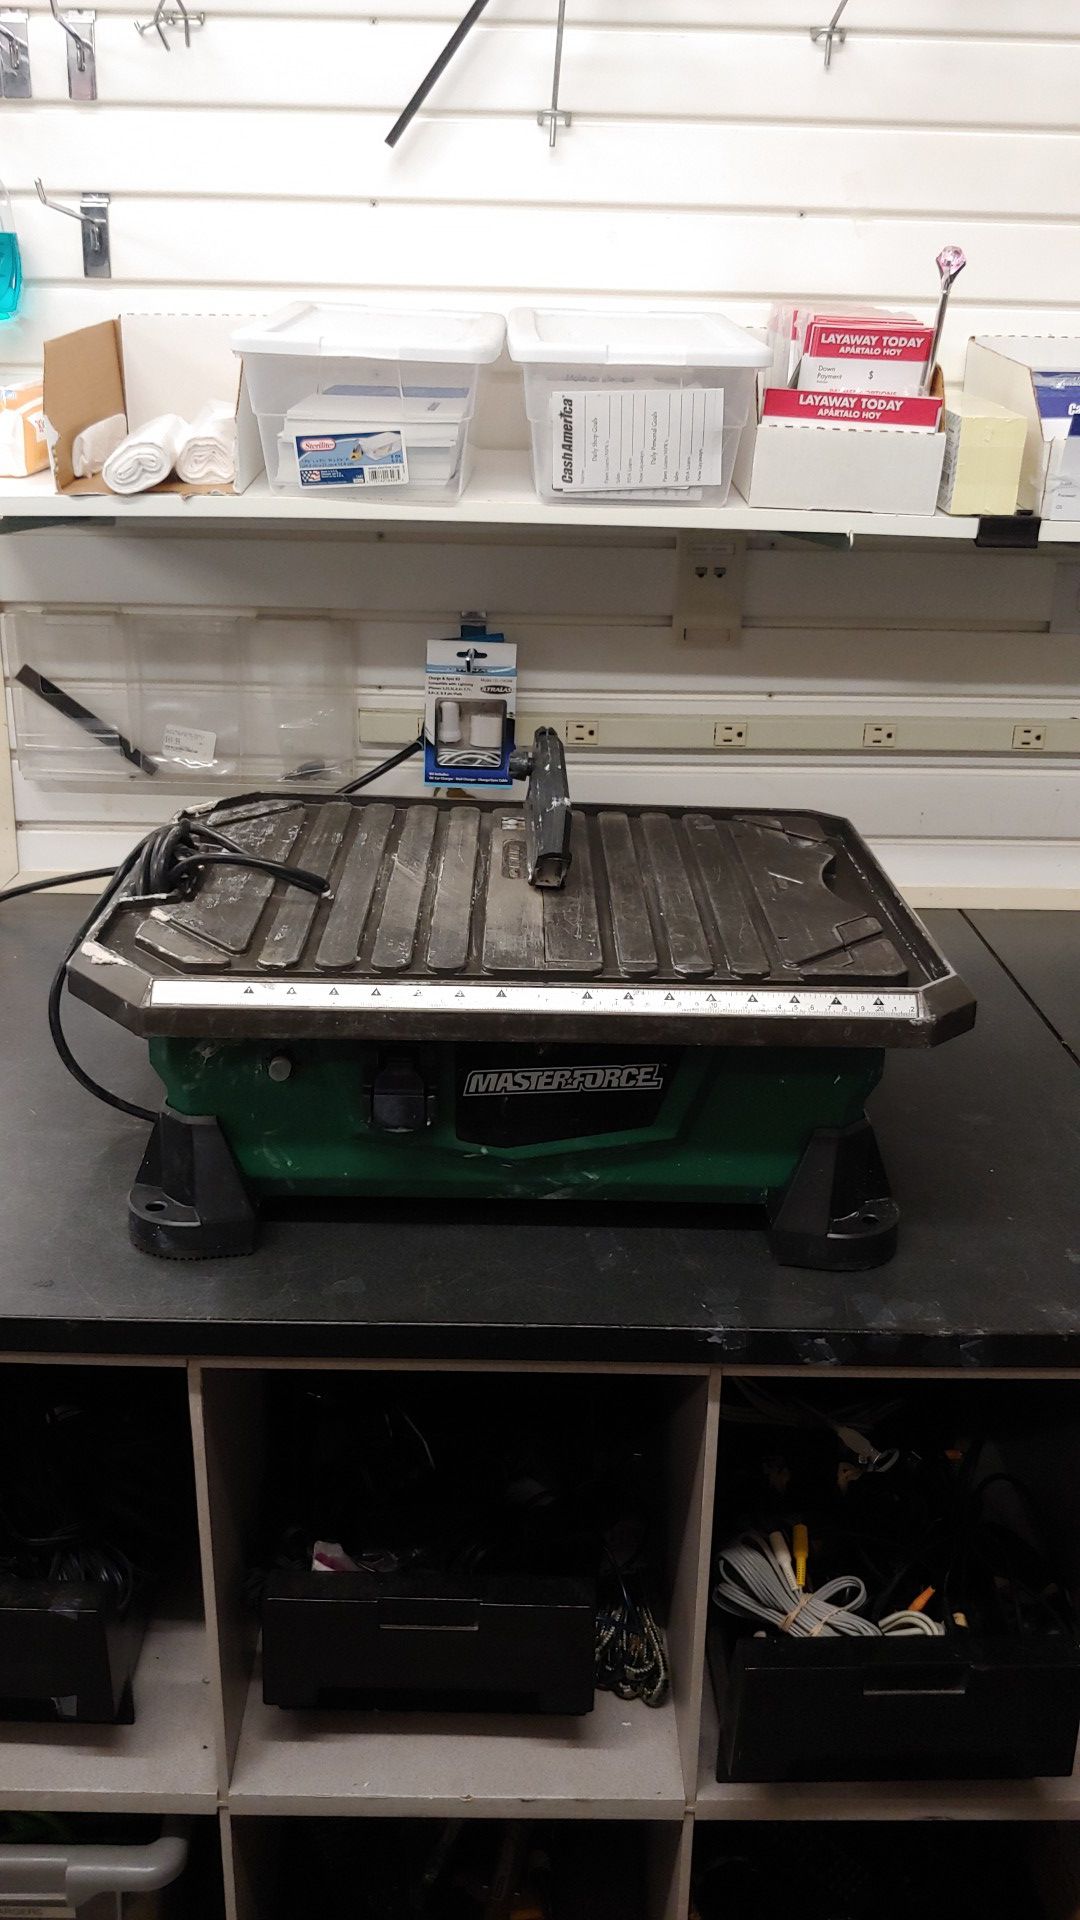 Masterforce Table Saw